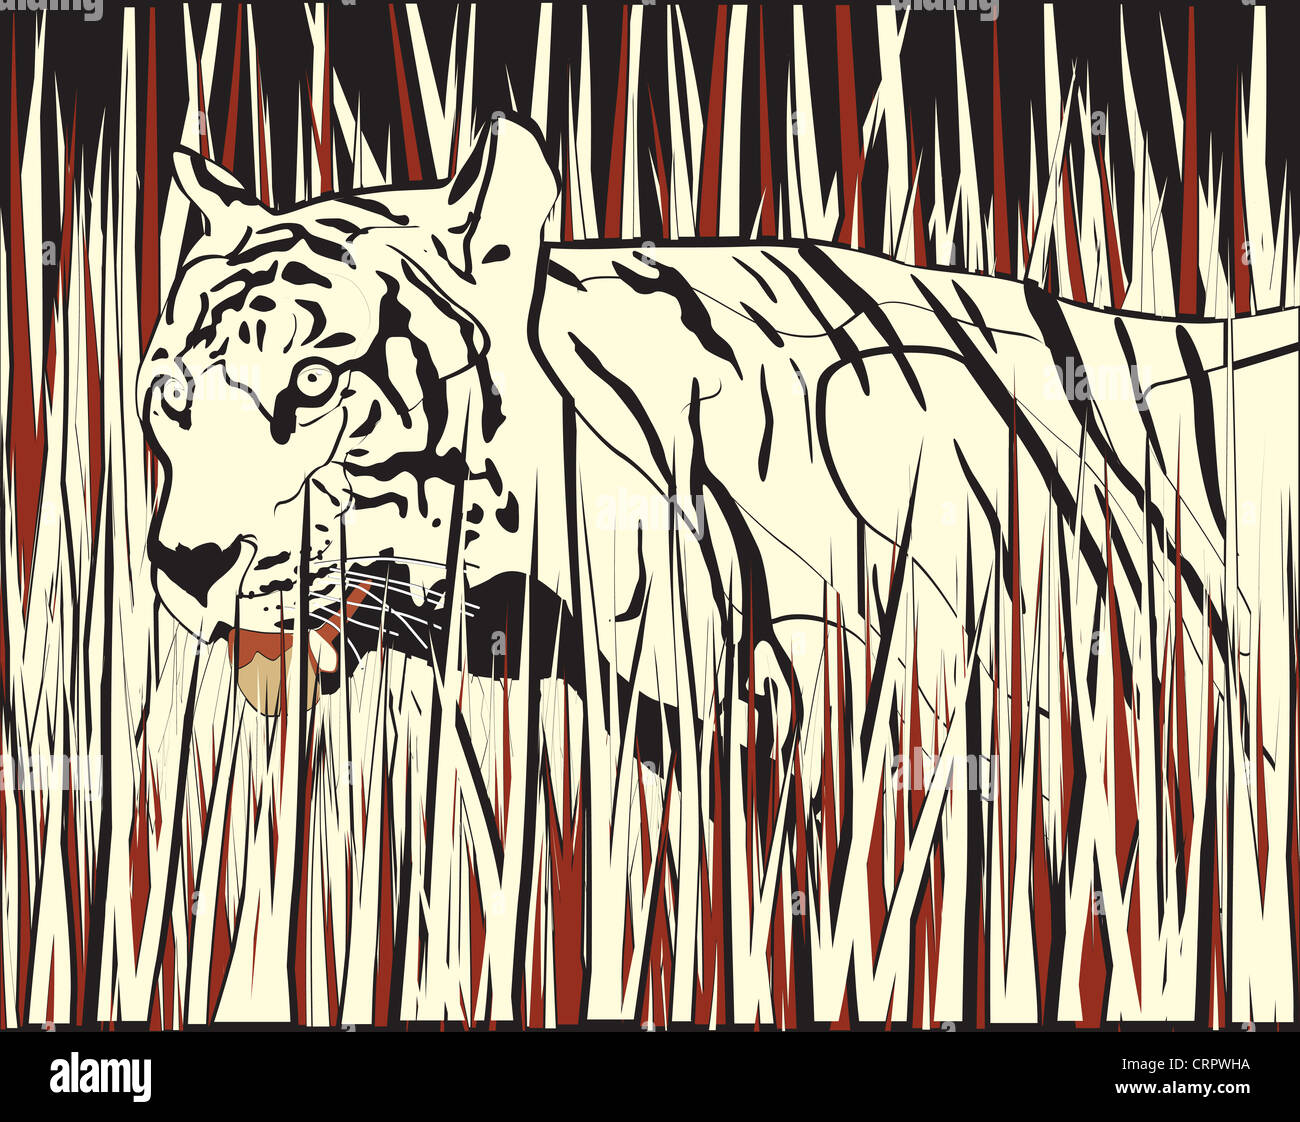 Illustration of a tiger prowling through dry grass Stock Photo